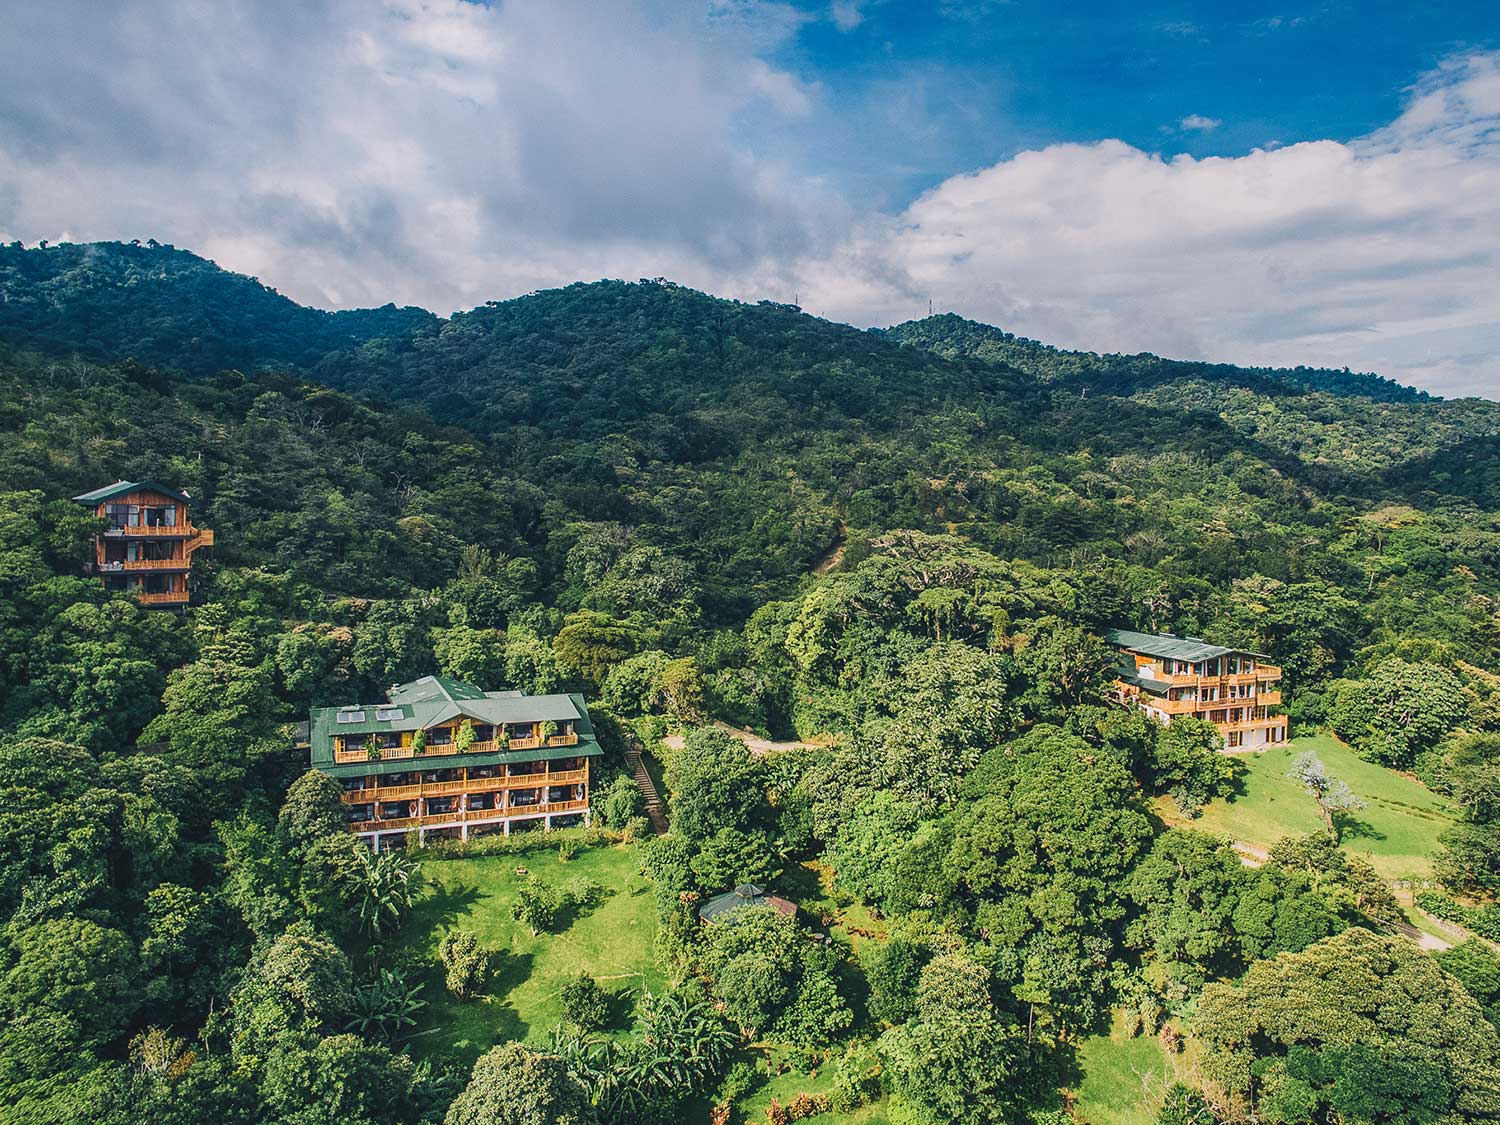 An aerial view of Hotel Belmar and the surrounding forestry in Costa Rica’s Monteverde Cloud Forest.